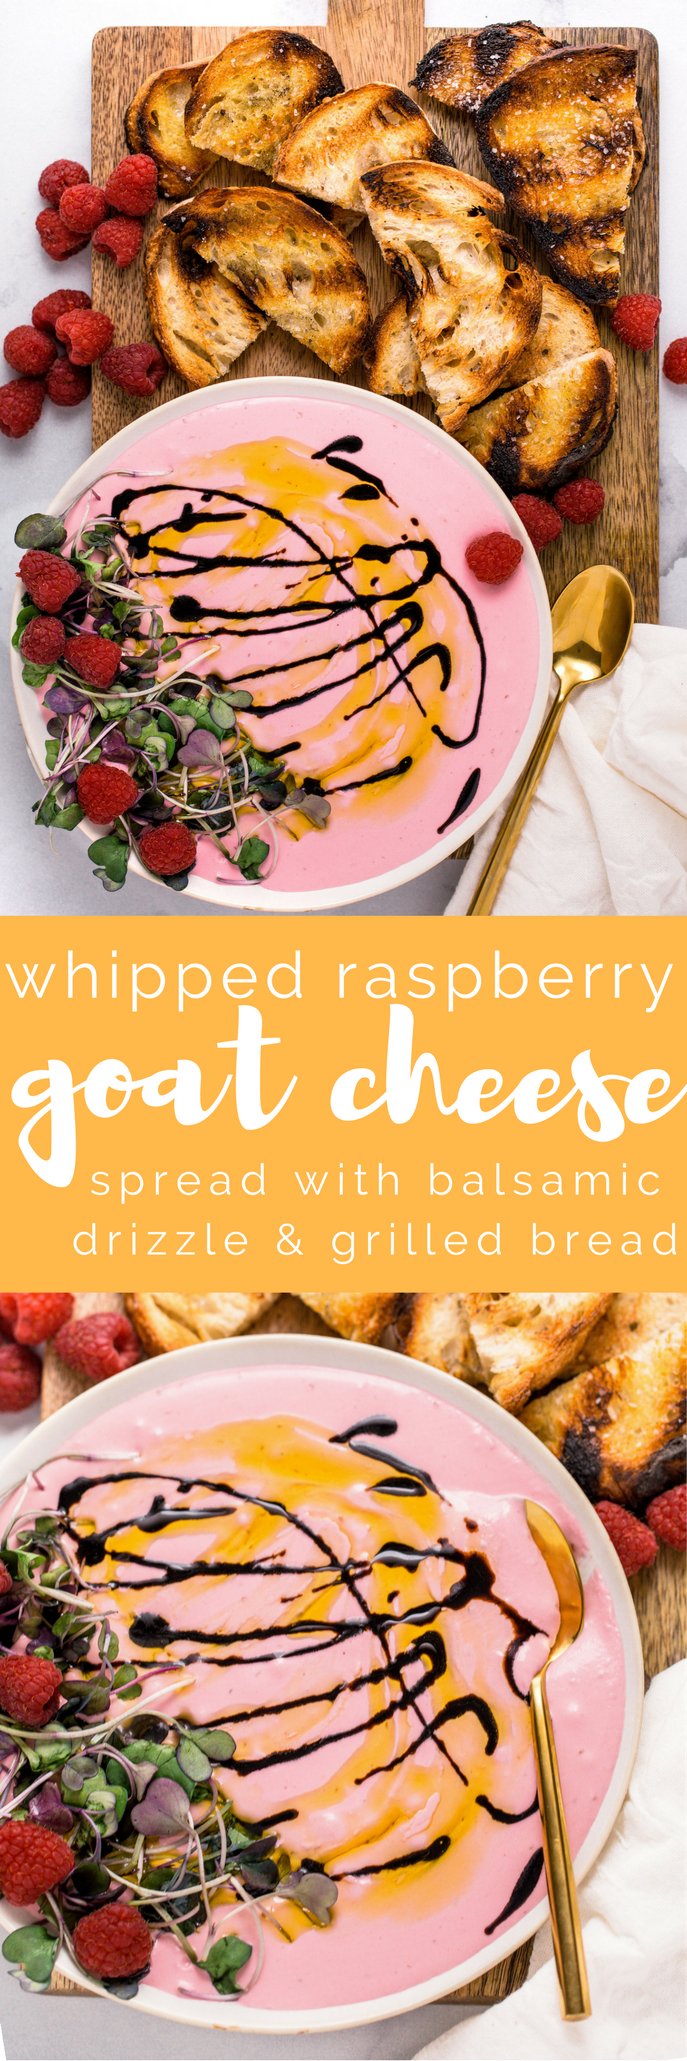 tart and juicy fresh raspberries whipped into creamy goat cheese with honey to make this whipped raspberry goat cheese spread. topped with a drizzle of reduced balsamic and served up with grilled bread, this whipped raspberry goat cheese spread is the perfect easy & elegant appetizer for any dinner party or girls night! #easyappetizerrecipe #rasberryrecipe #goatcheesespread #girlsnightidea #girlsnightrecipe #playswellwithbutter